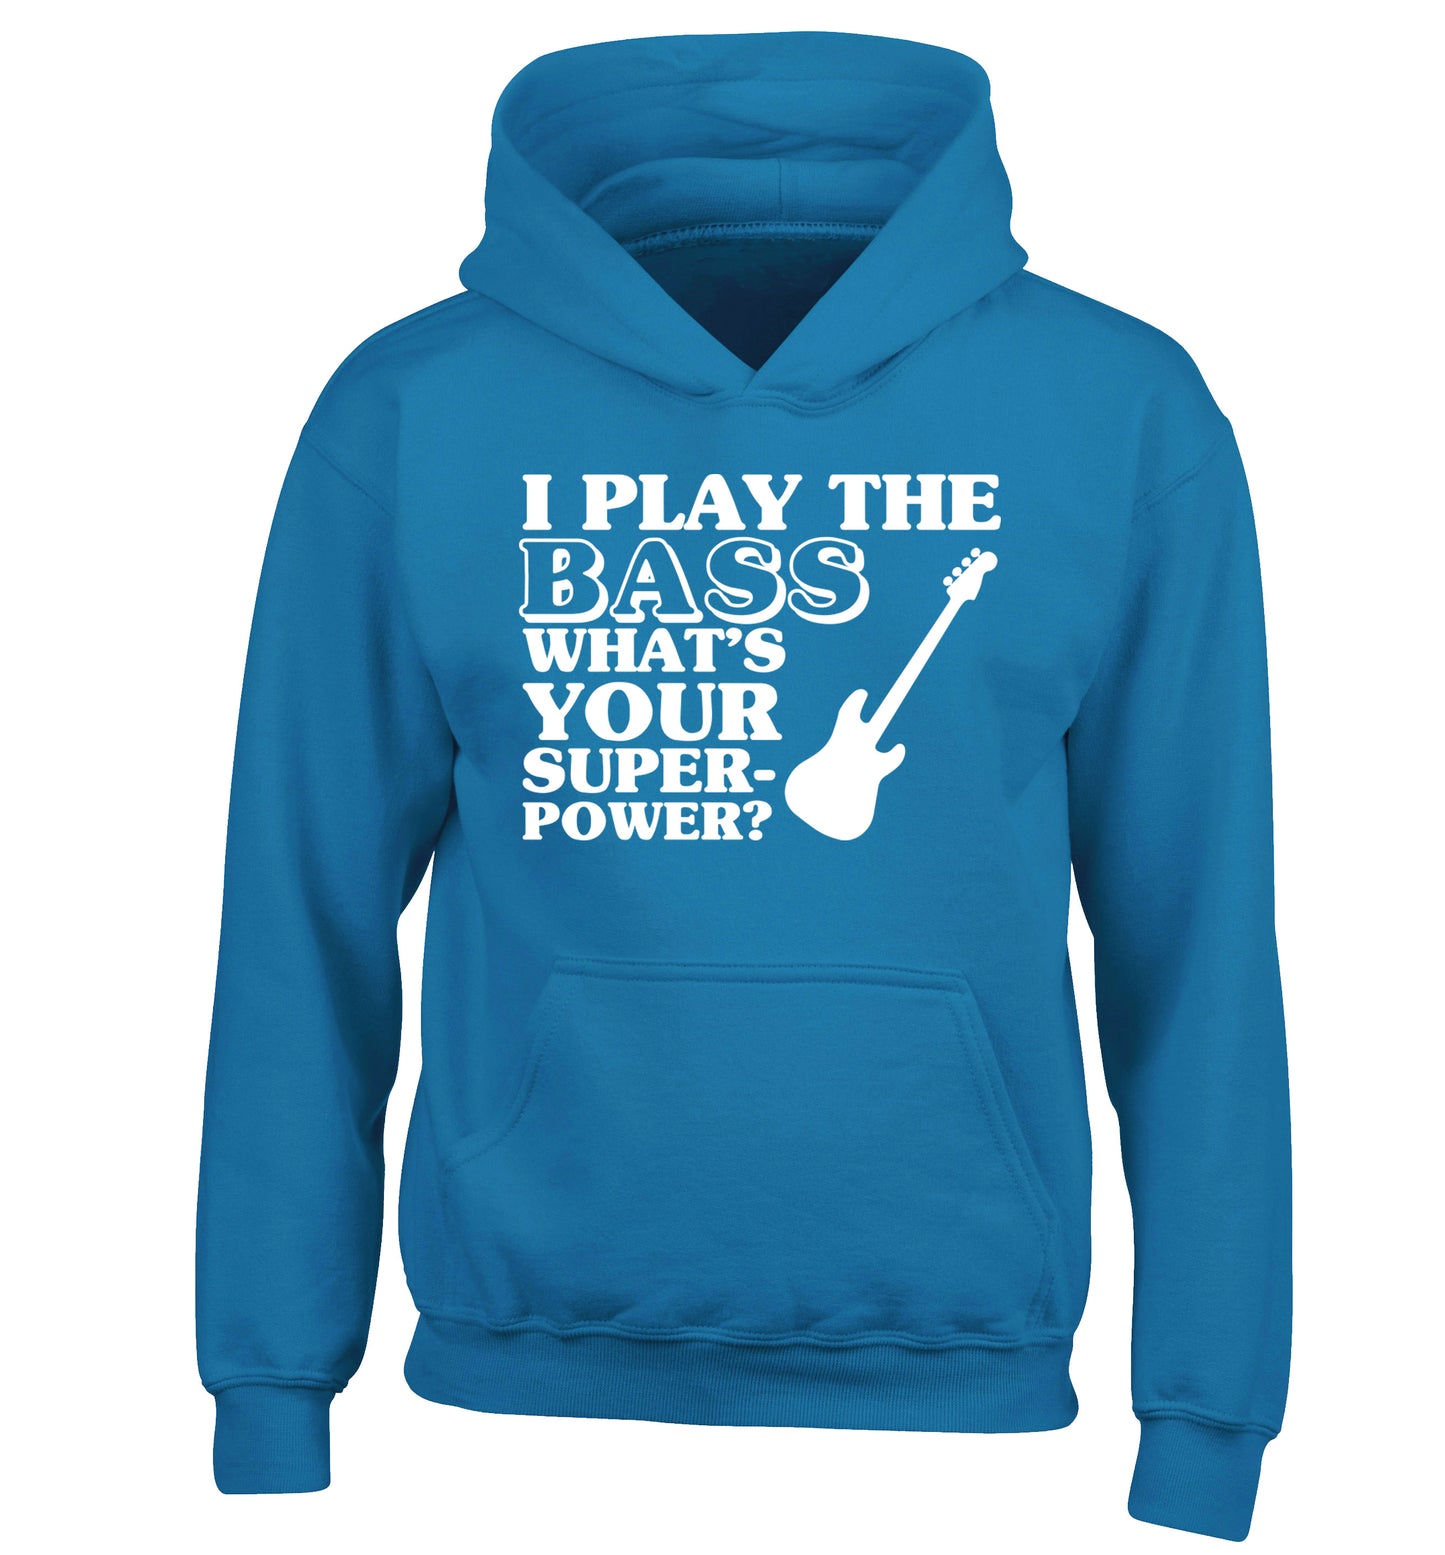 I play the bass what's your superpower? children's blue hoodie 12-14 Years